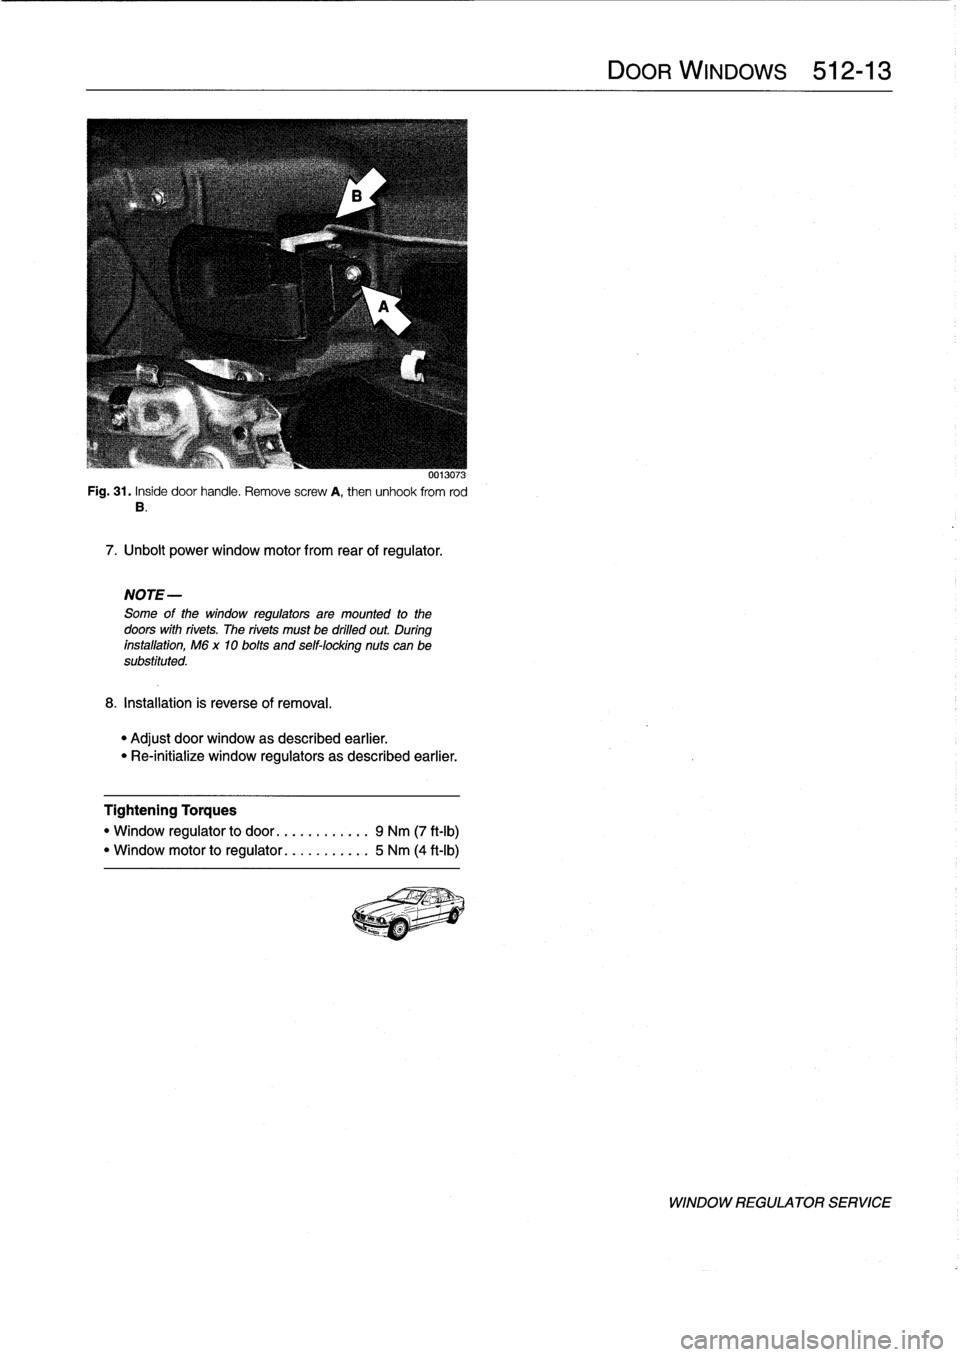 BMW 318i 1997 E36 Owners Manual 
Fig
.
31
.
Inside
door
handle
.
Remove
screw
A,then
unhook
from
rod
B
.

7
.
Unbolt
power
window
motor
from
rear
of
regulator
.

NOTE-

Some
of
the
window
regulators
are
mounted
to
the
doors
with
riv